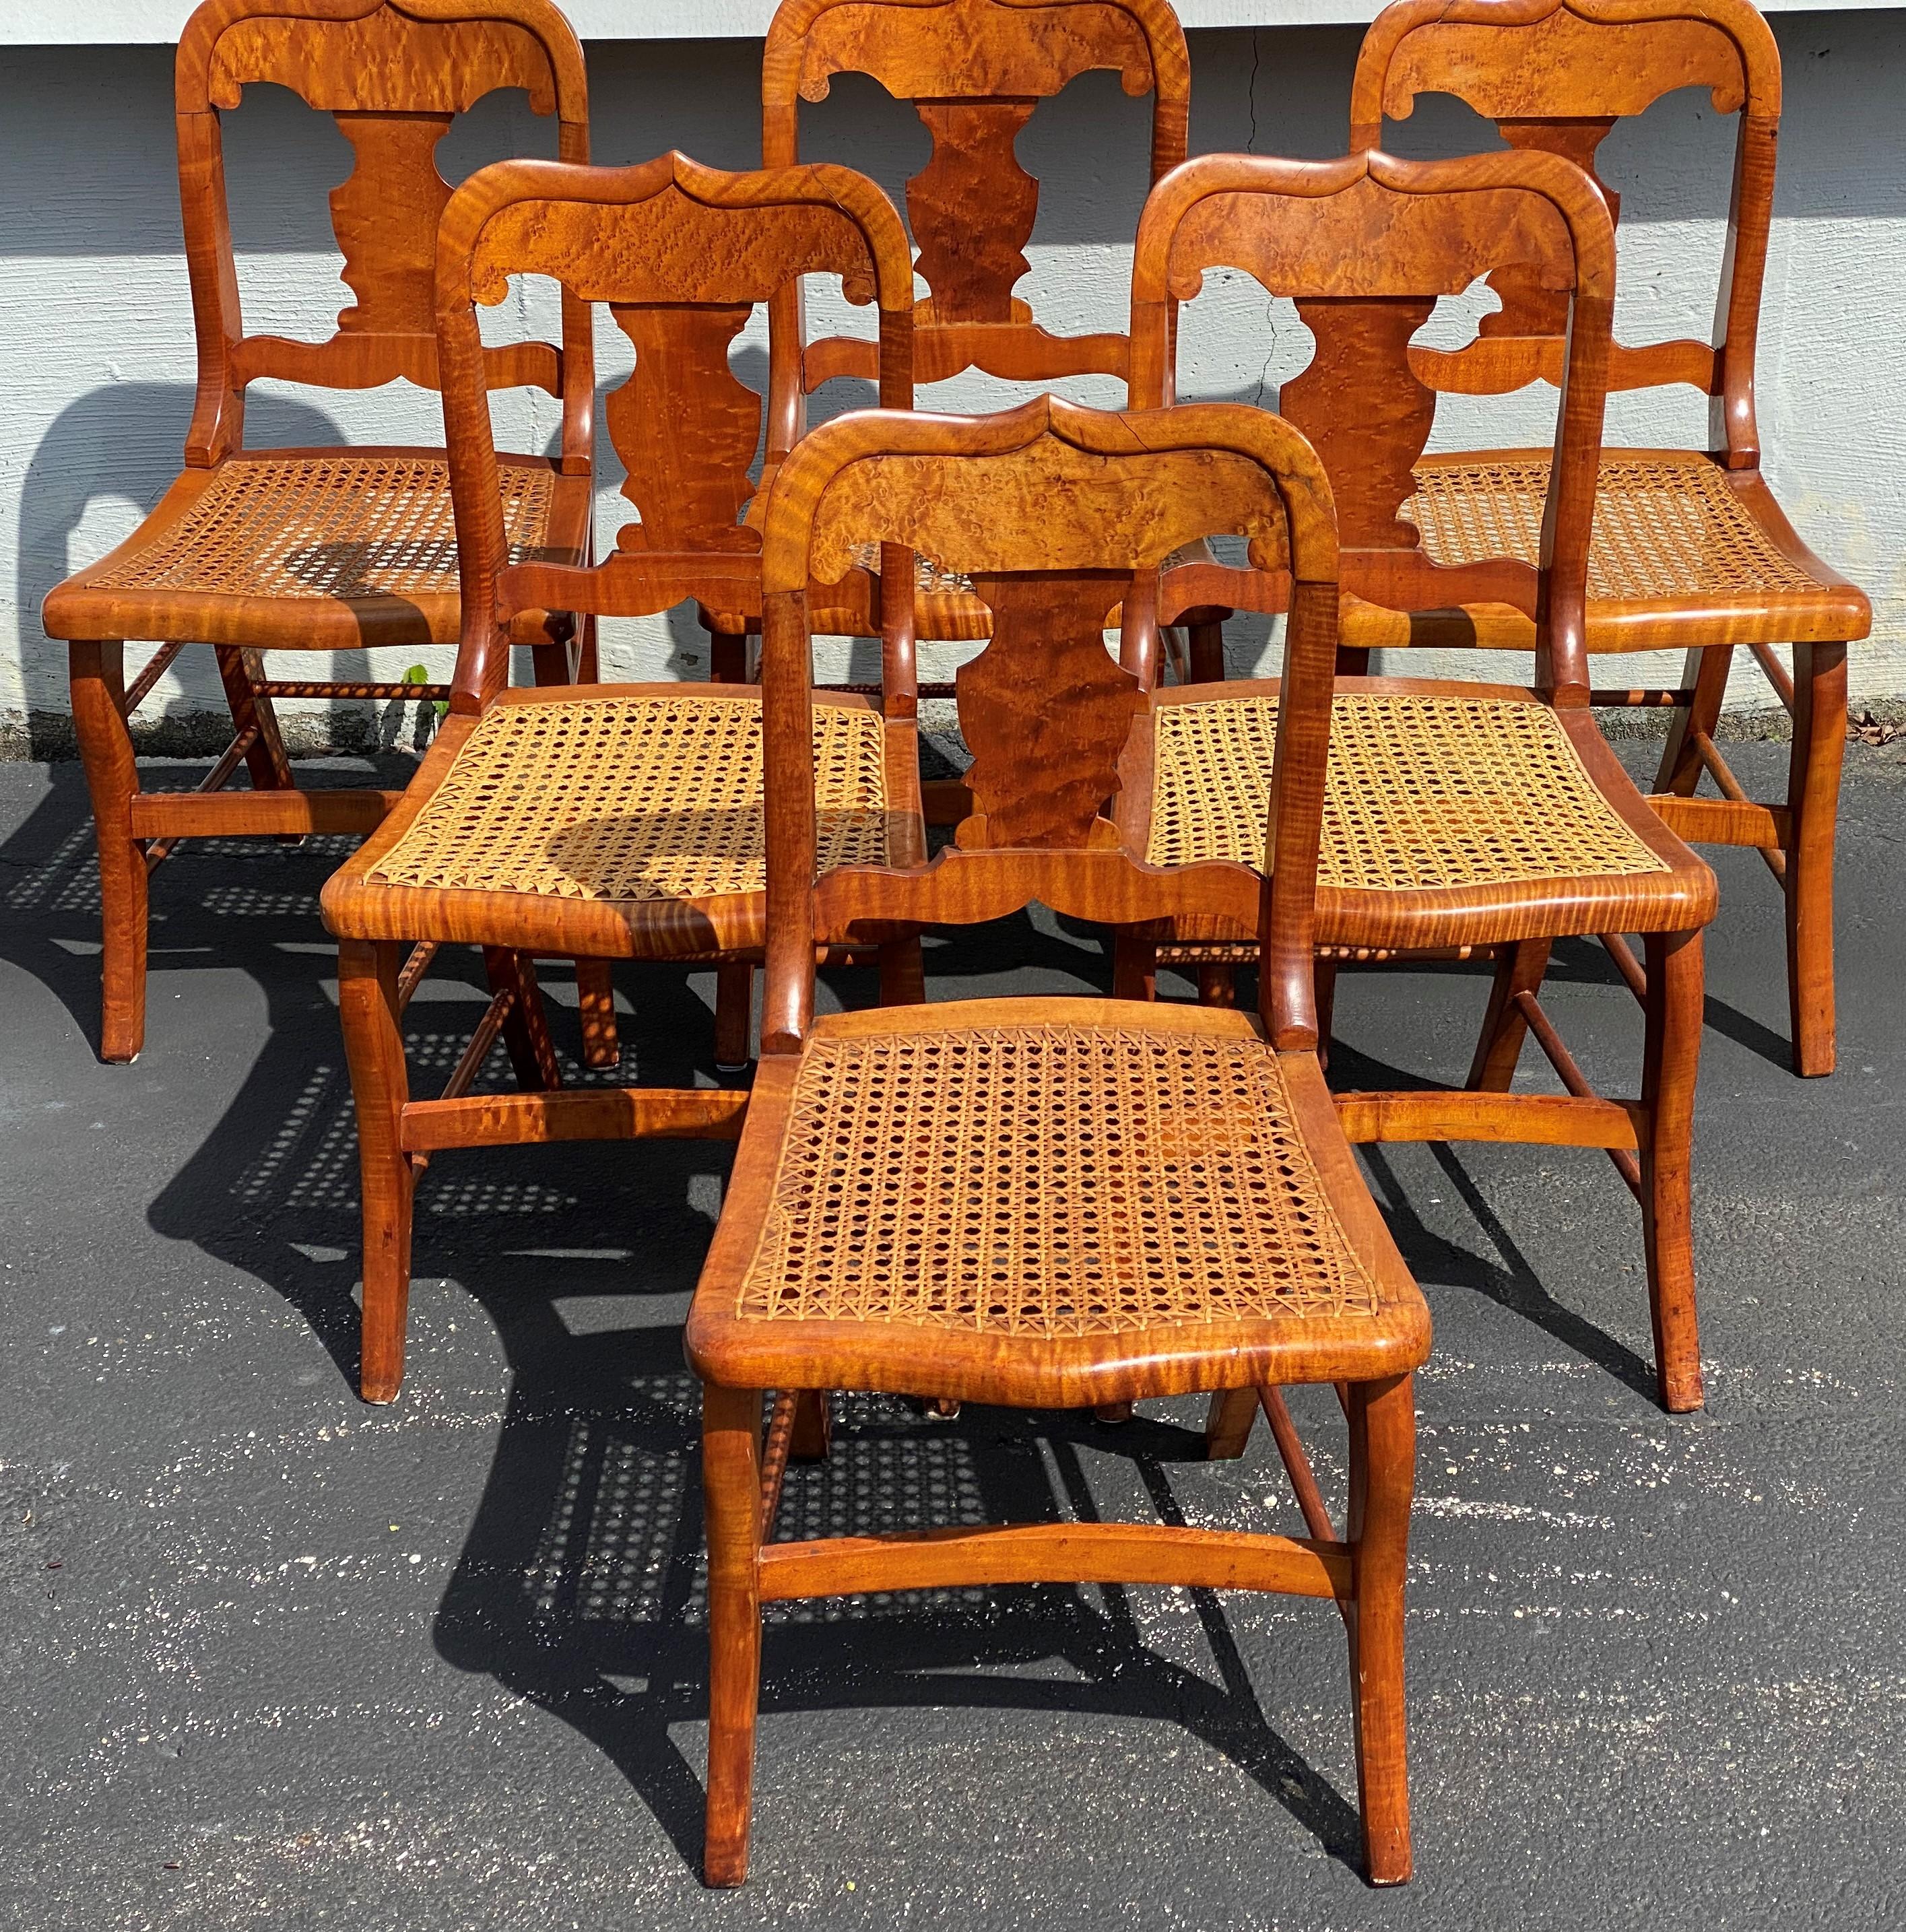 A fine set of six birdseye maple side chairs with caned seats in the Empire taste, with nicely shaped crests and splats dating to the 19th century. Very good overall condition, two chairs with newer caning, minor edge losses, old crack repairs, and